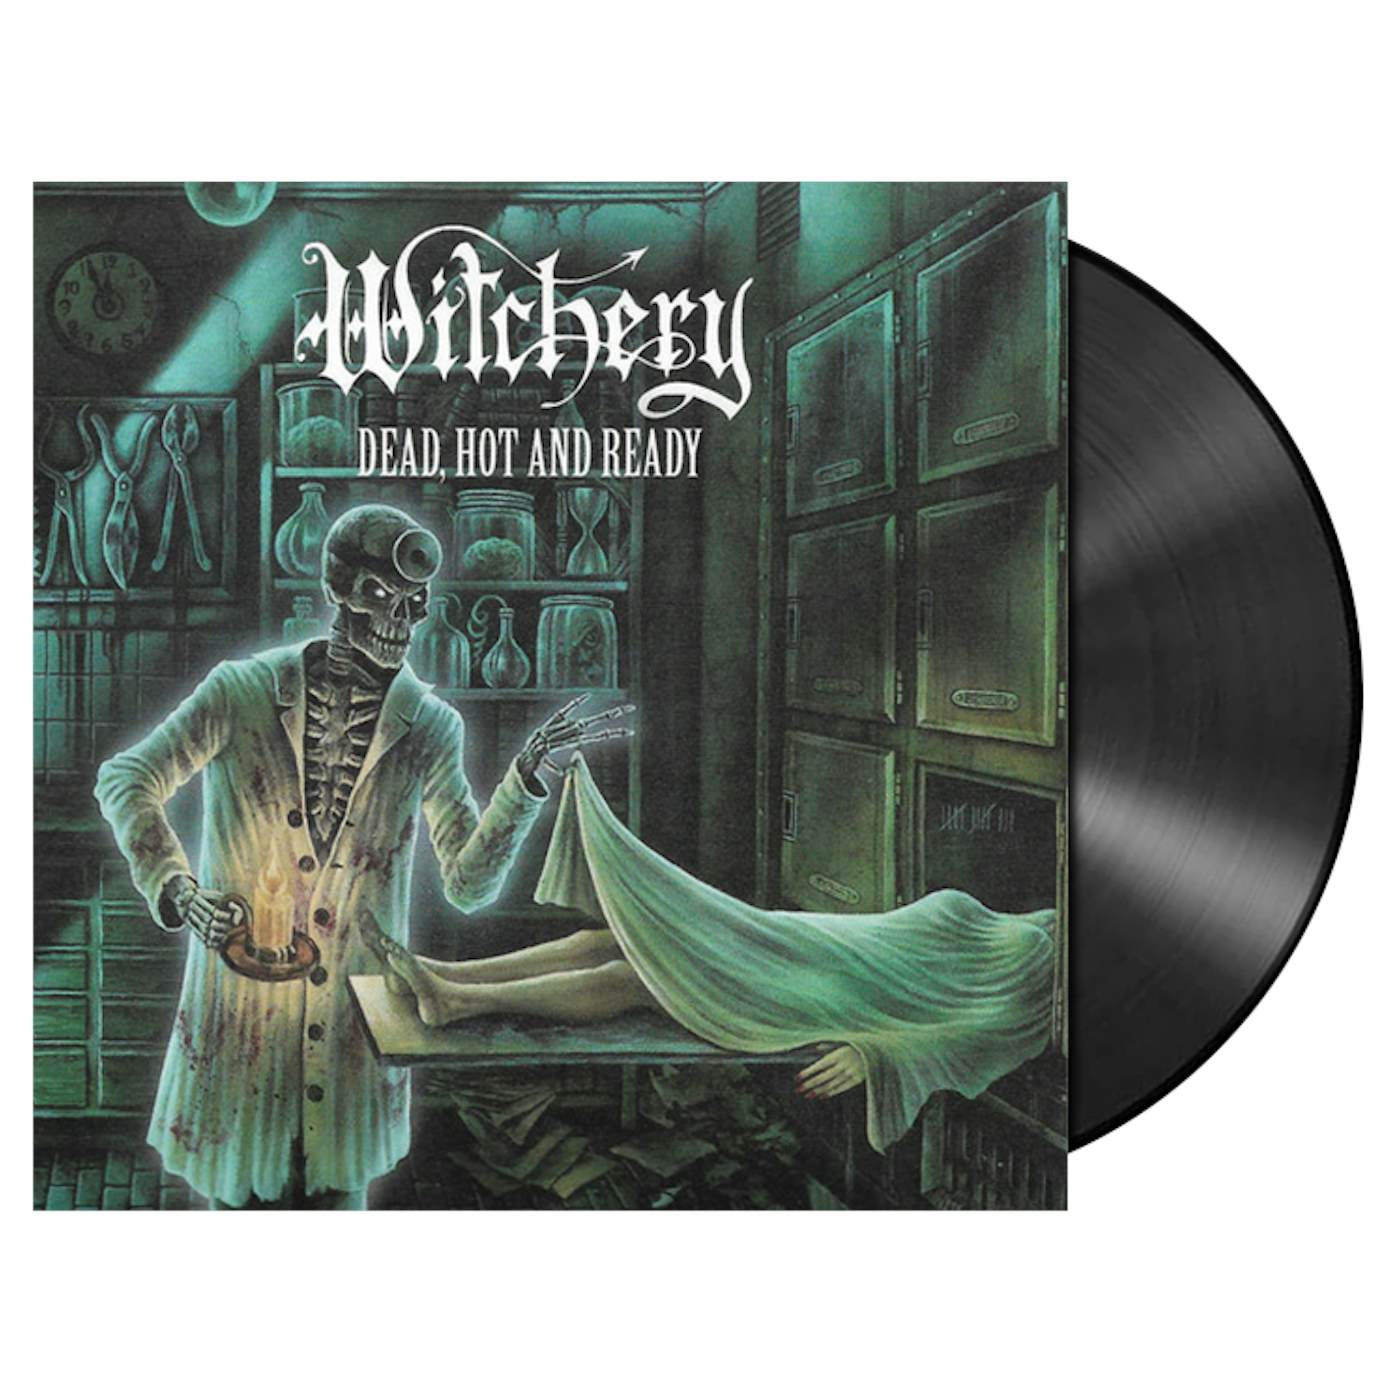 WITCHERY - 'Dead, Hot And Ready' LP (Vinyl)